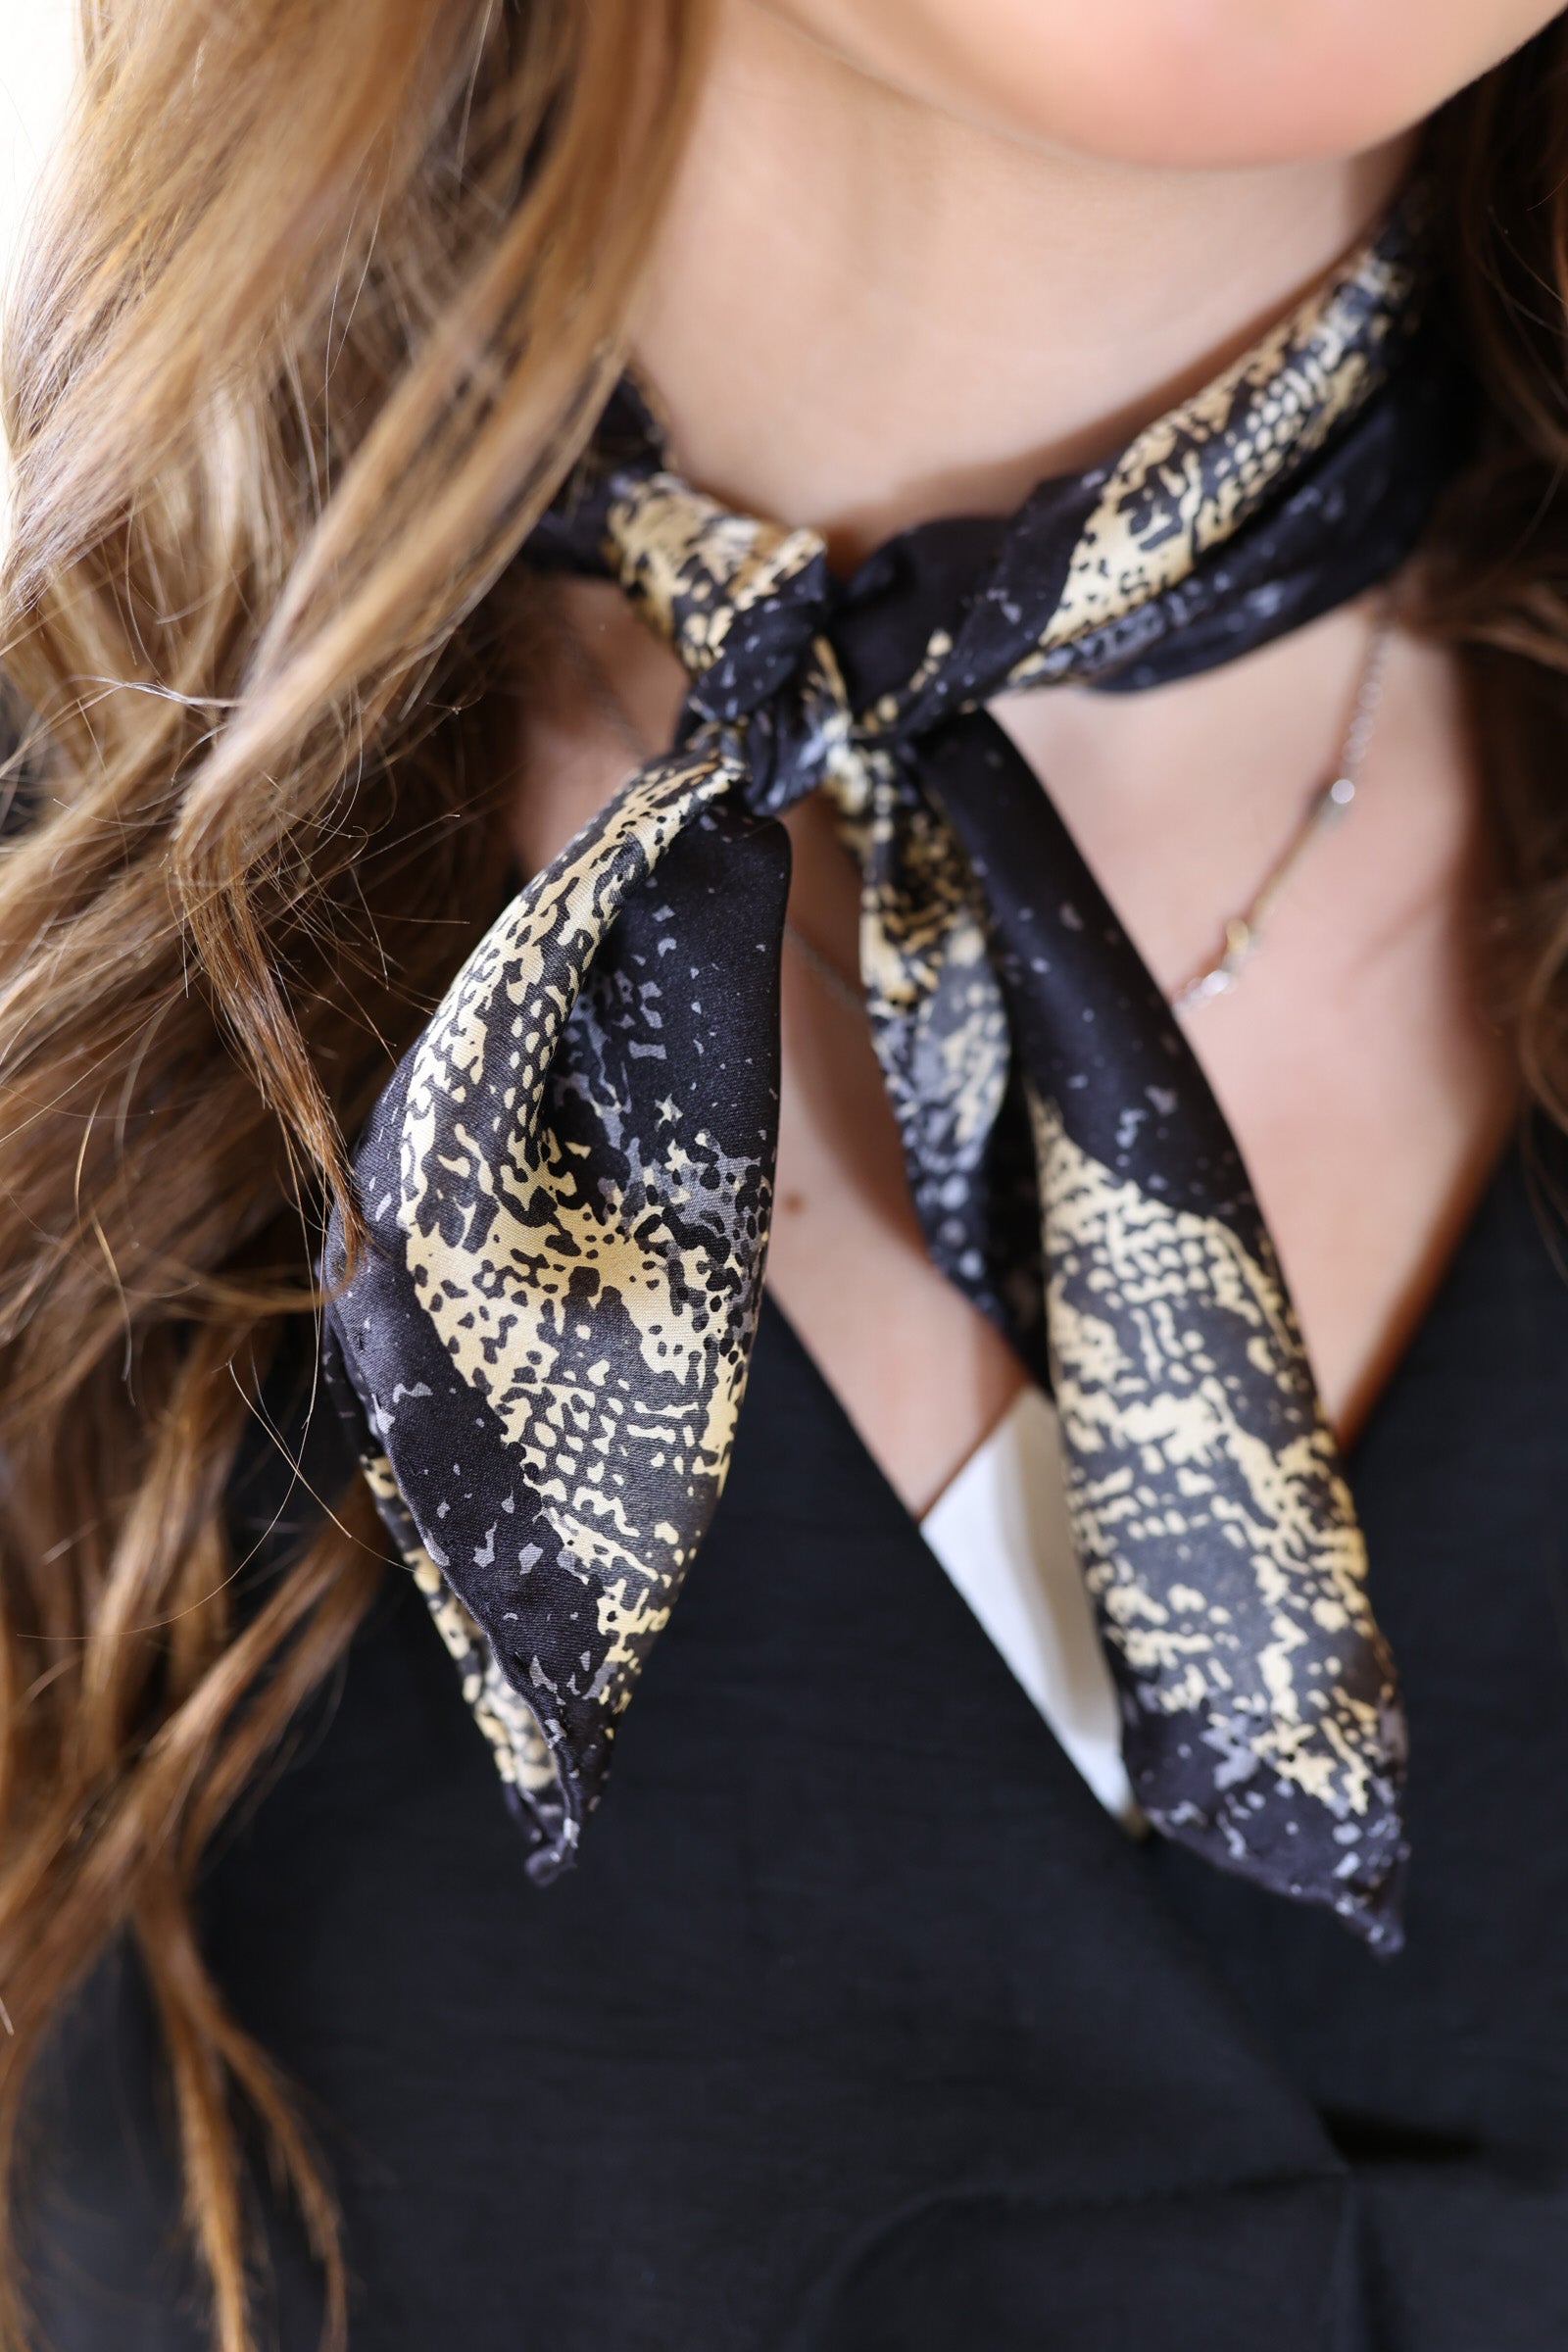 Mini Python Charmeuse Wild Rag in Black and Gold - Giddy Up Glamour Boutique